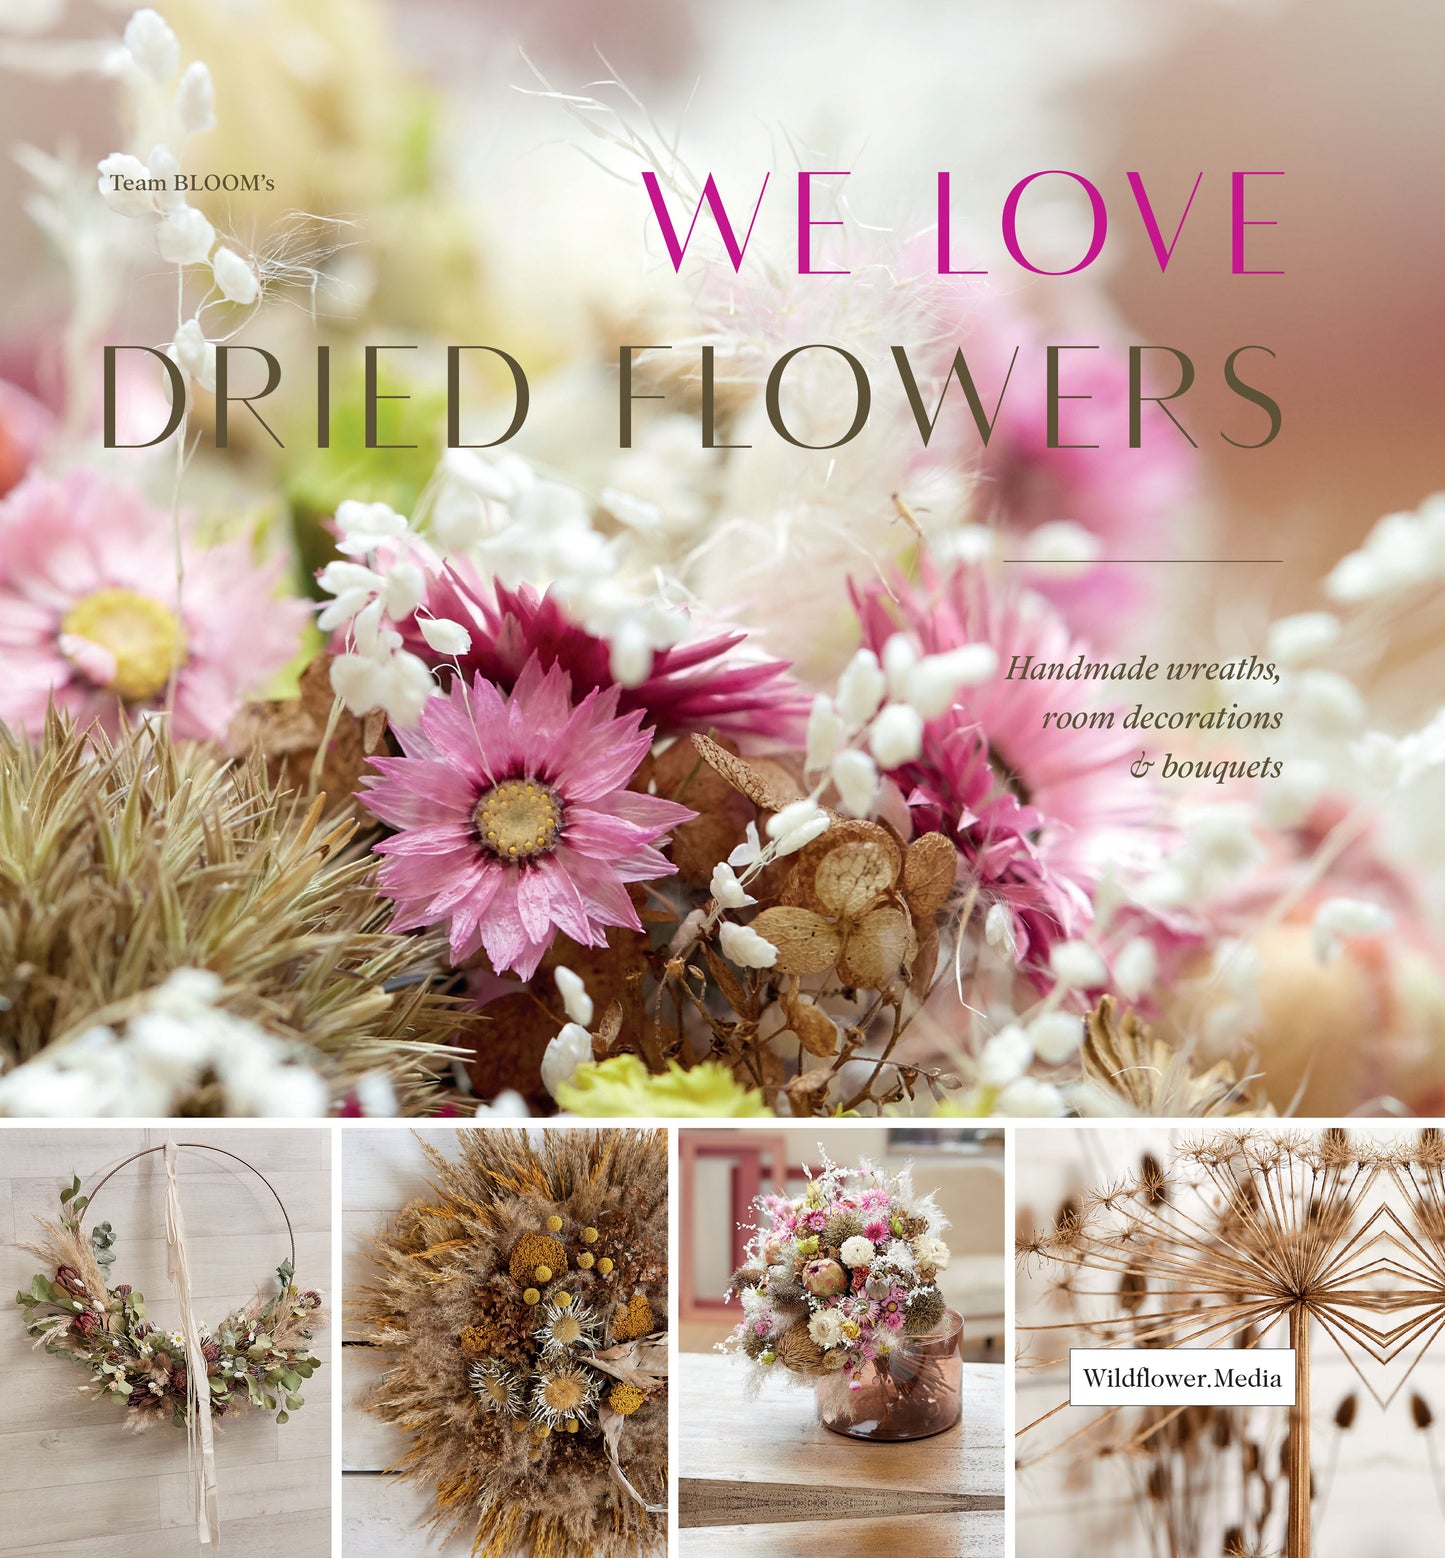 Seasonal Publisher's Pack - Five of Our Best-Selling Seasonal Floral Design Books - One Great Price!